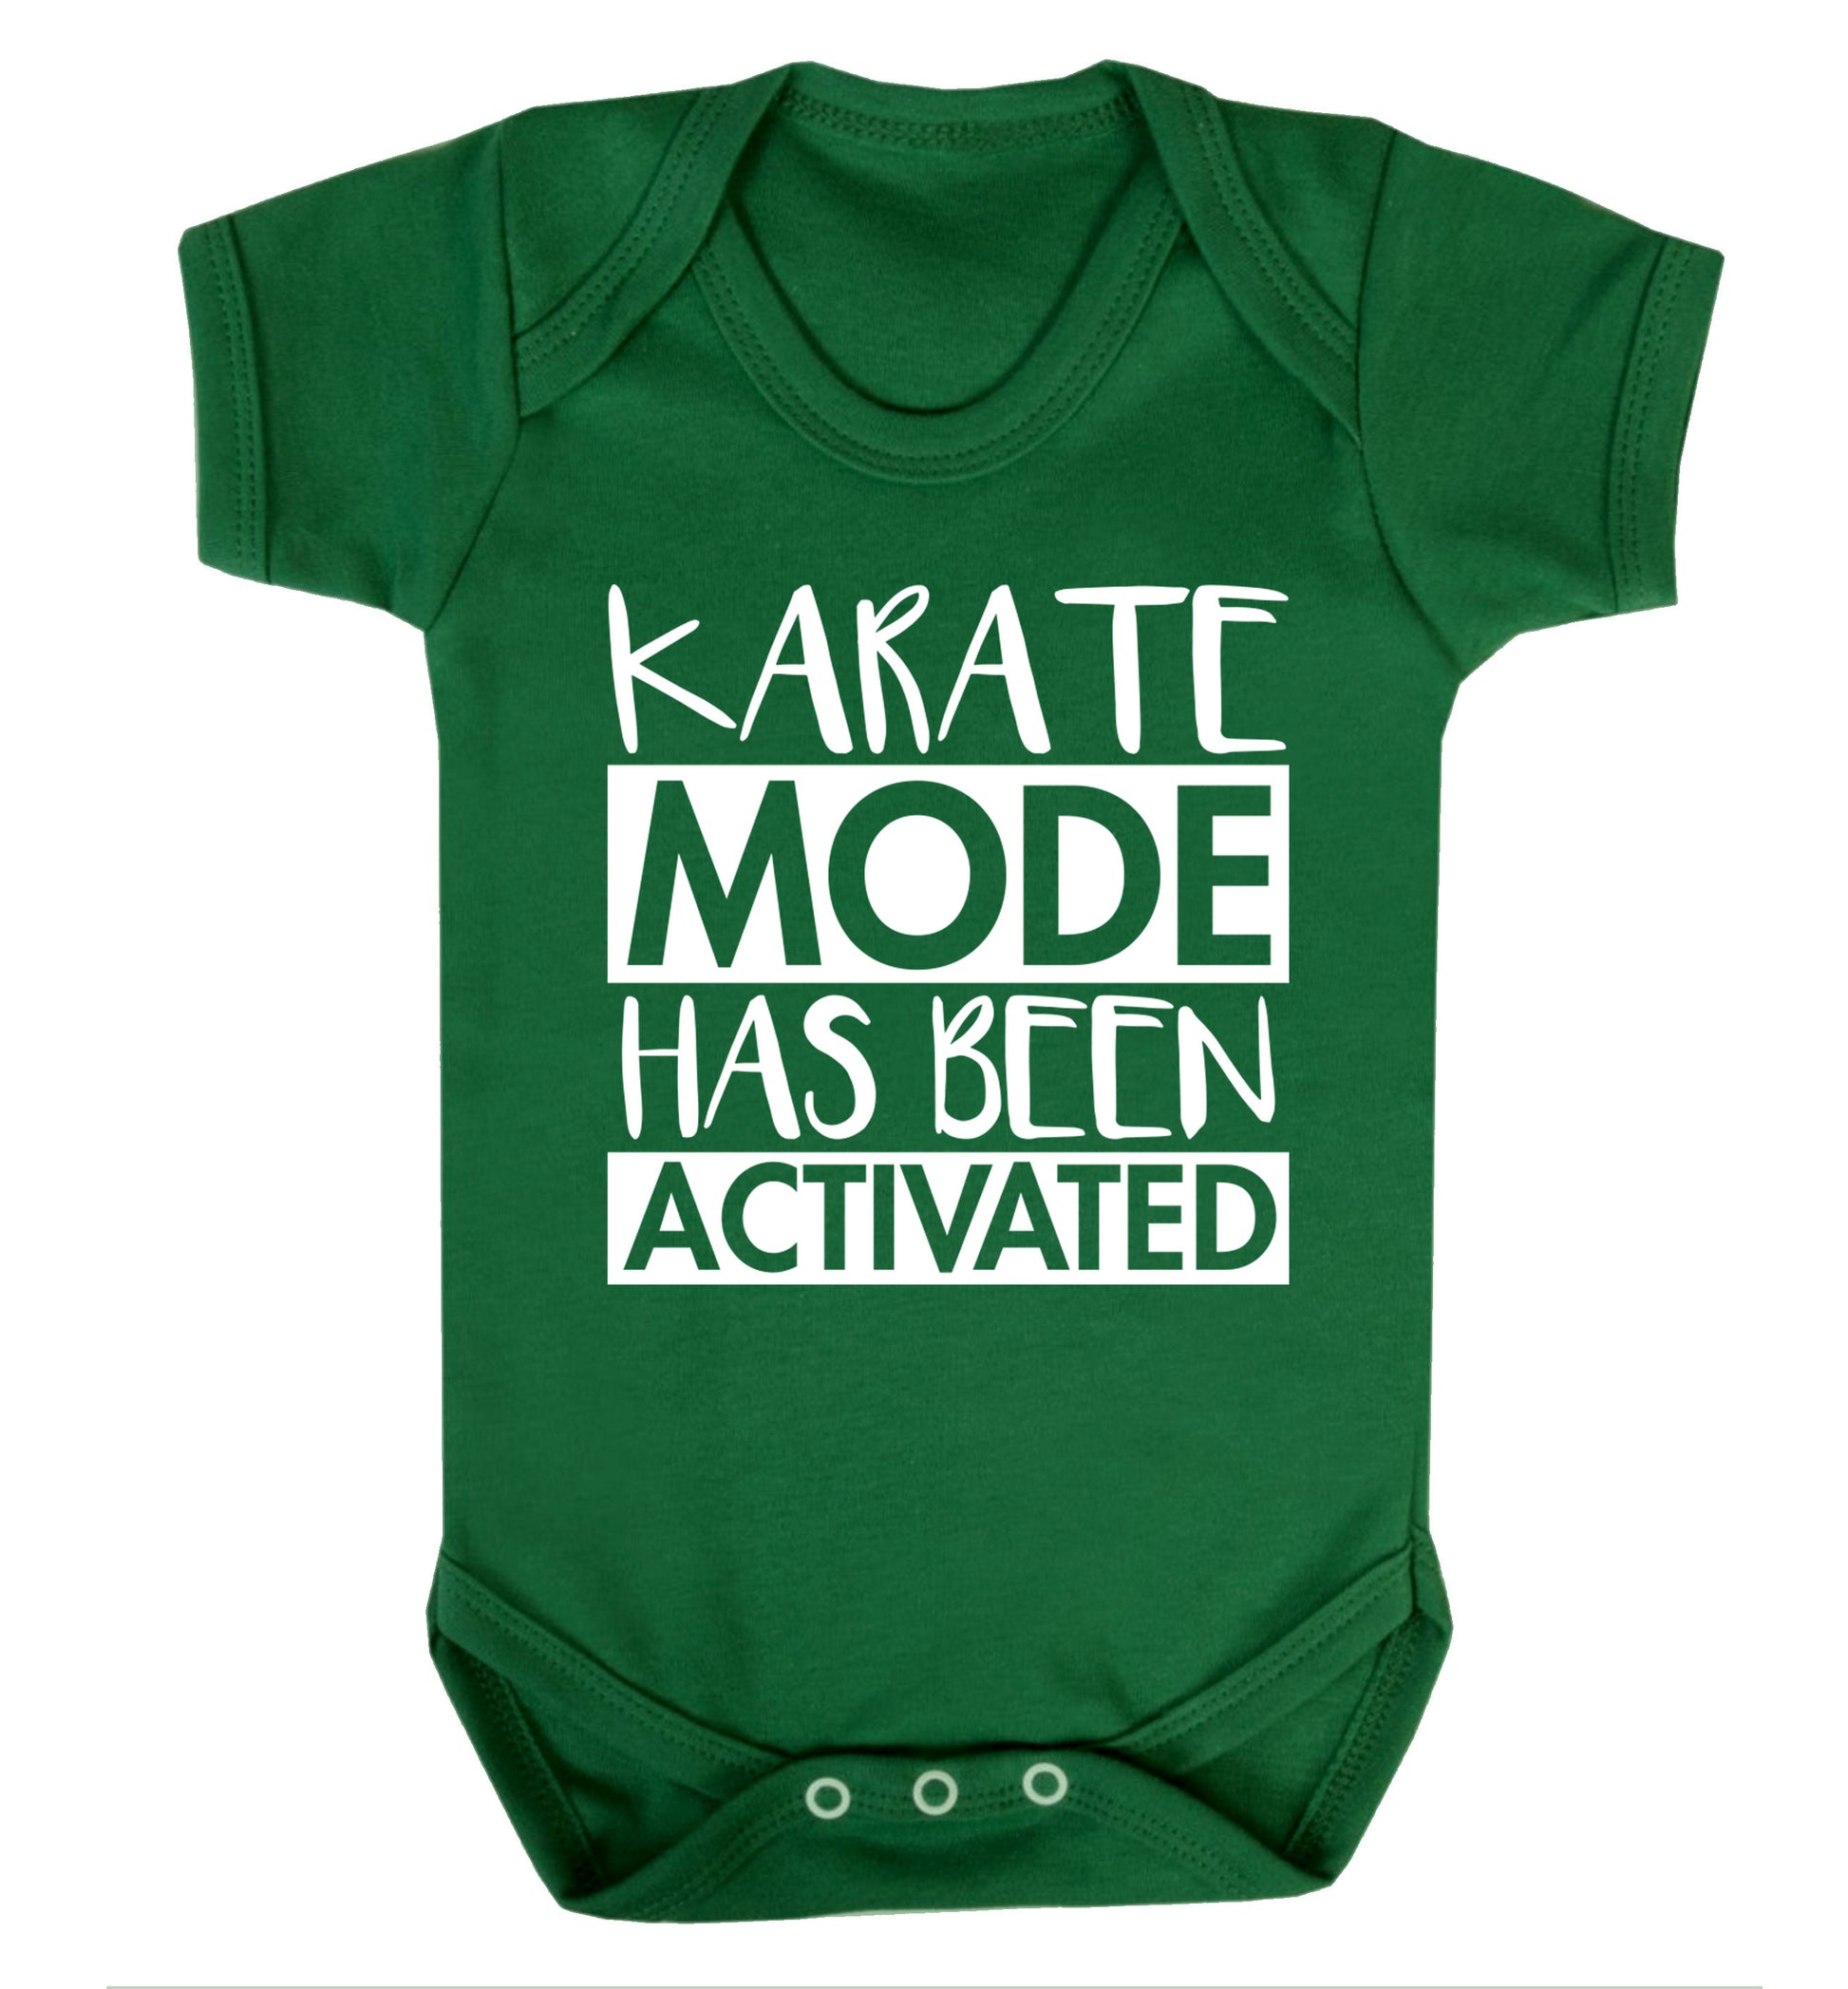 Karate mode activated Baby Vest green 18-24 months